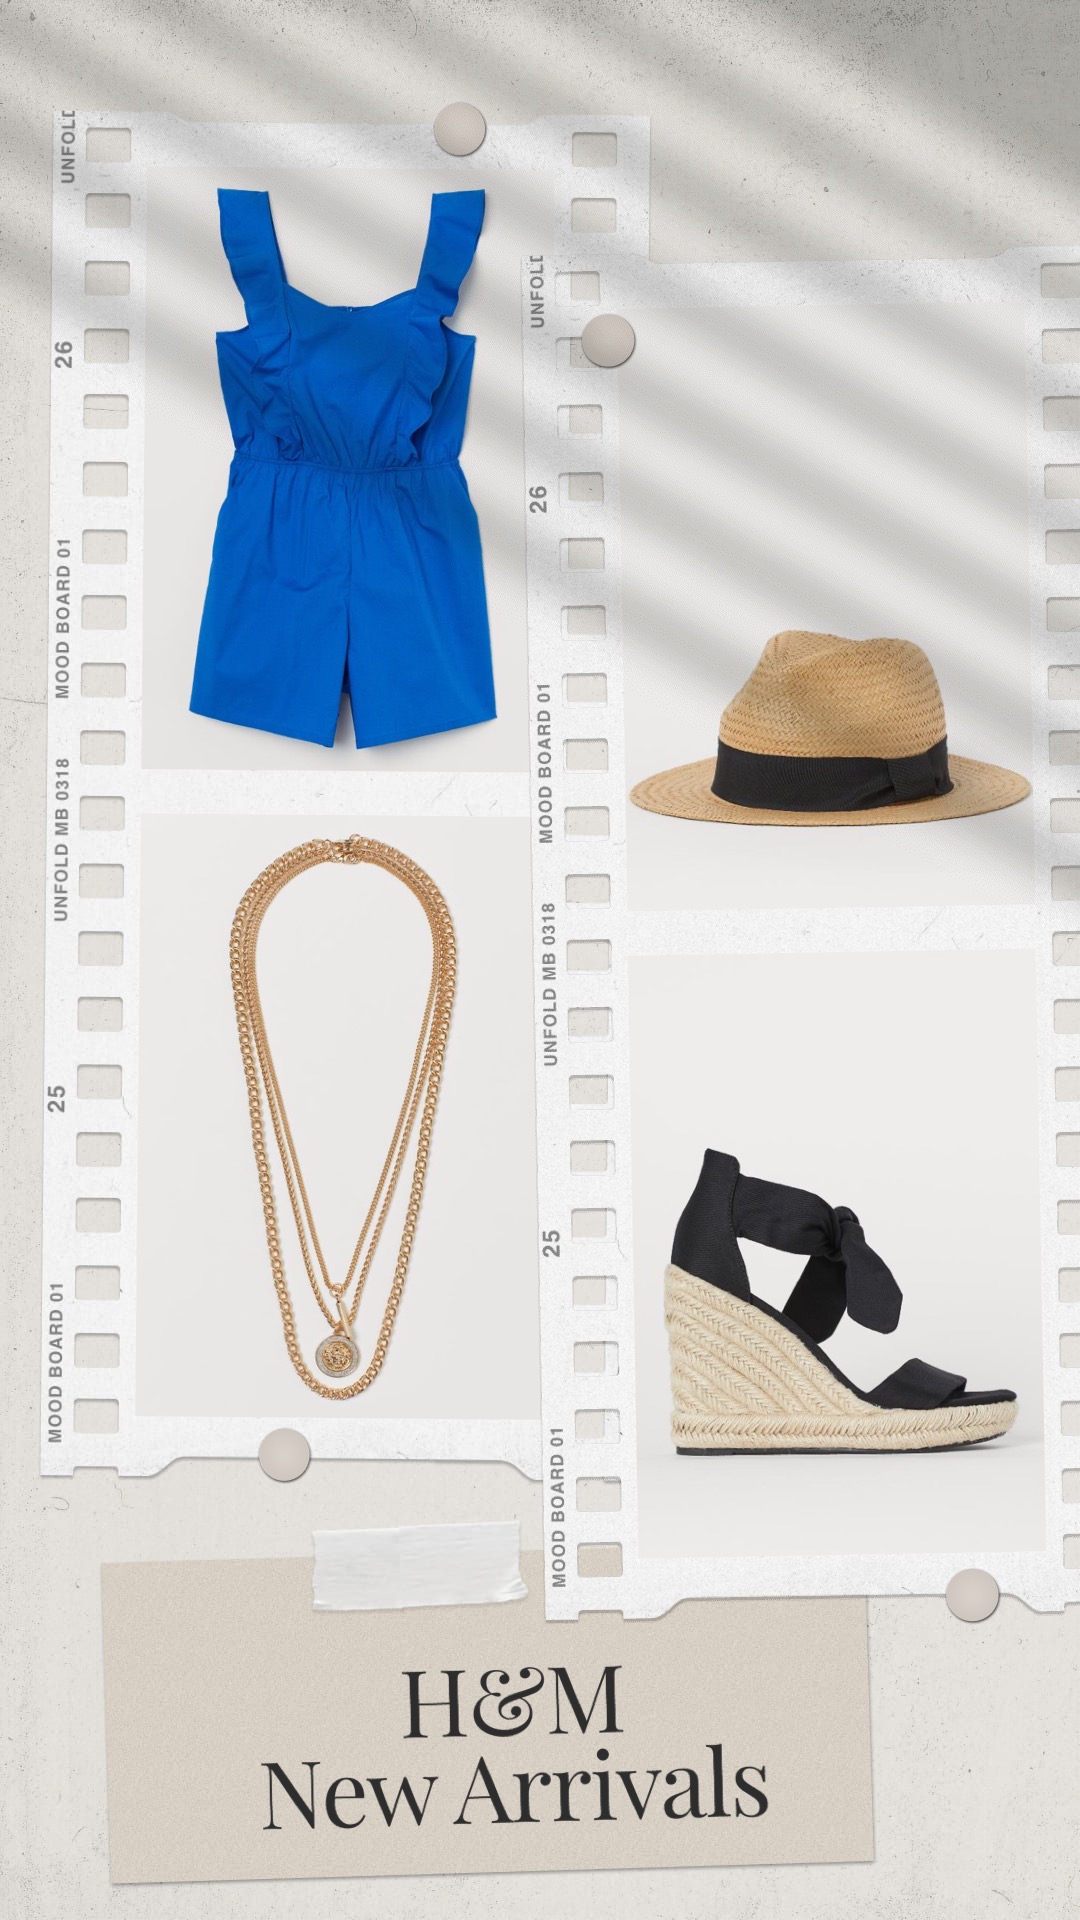 H&M Summer Outfit and New Arrivals 2020 | Flounce Trim Romper | 3-pack Necklaces | Straw Hat with Grosgrain Band | Wedge-heeled Sandals